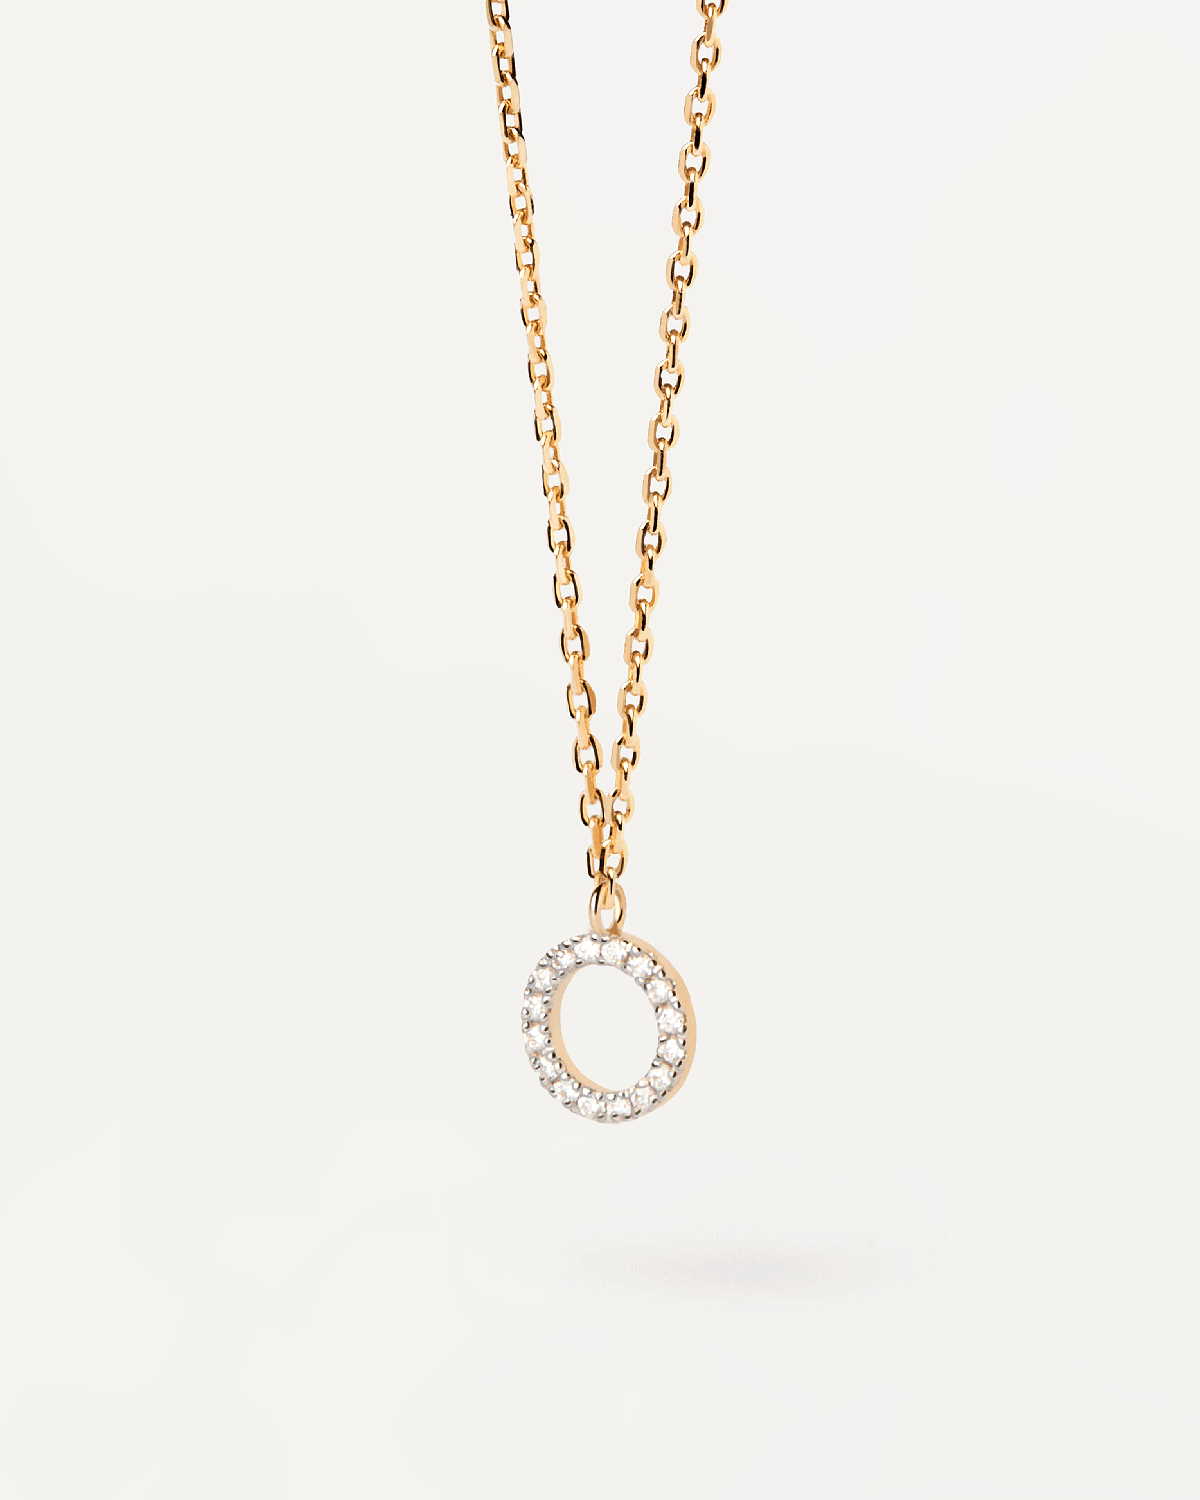 Diamonds and gold Circle necklace. Solid yellow gold necklace with a circular pendant with lab-grown diamonds of 0.06 carats. Get the latest arrival from PDPAOLA. Place your order safely and get this Best Seller.